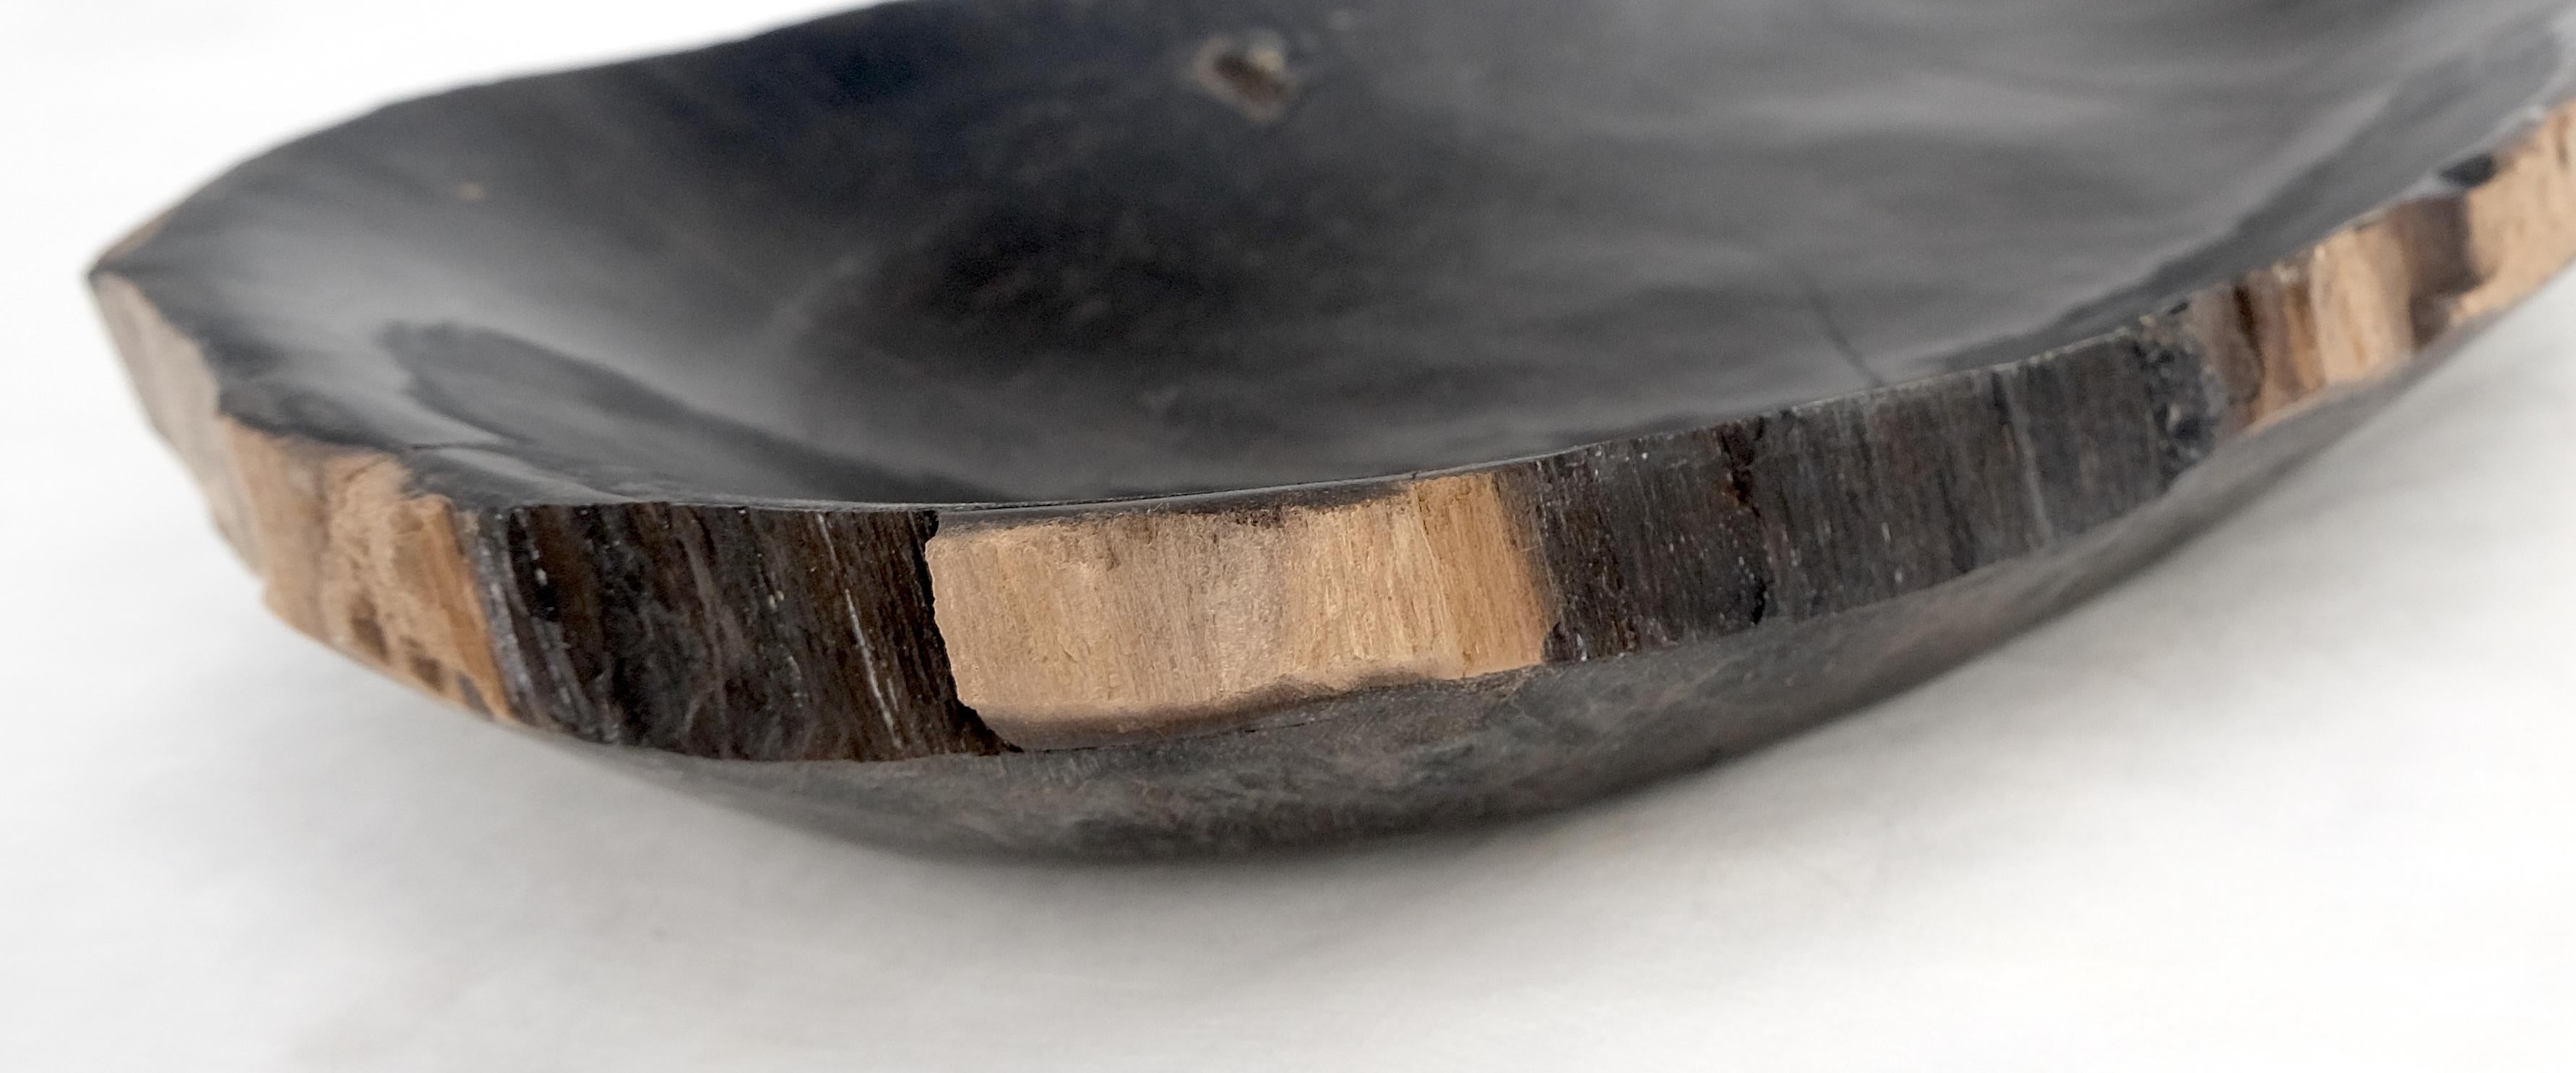 Contemporary Petrified Wood Round Shape Solid Black Round Bowl Dish Large Plate Ashtray MINT! For Sale